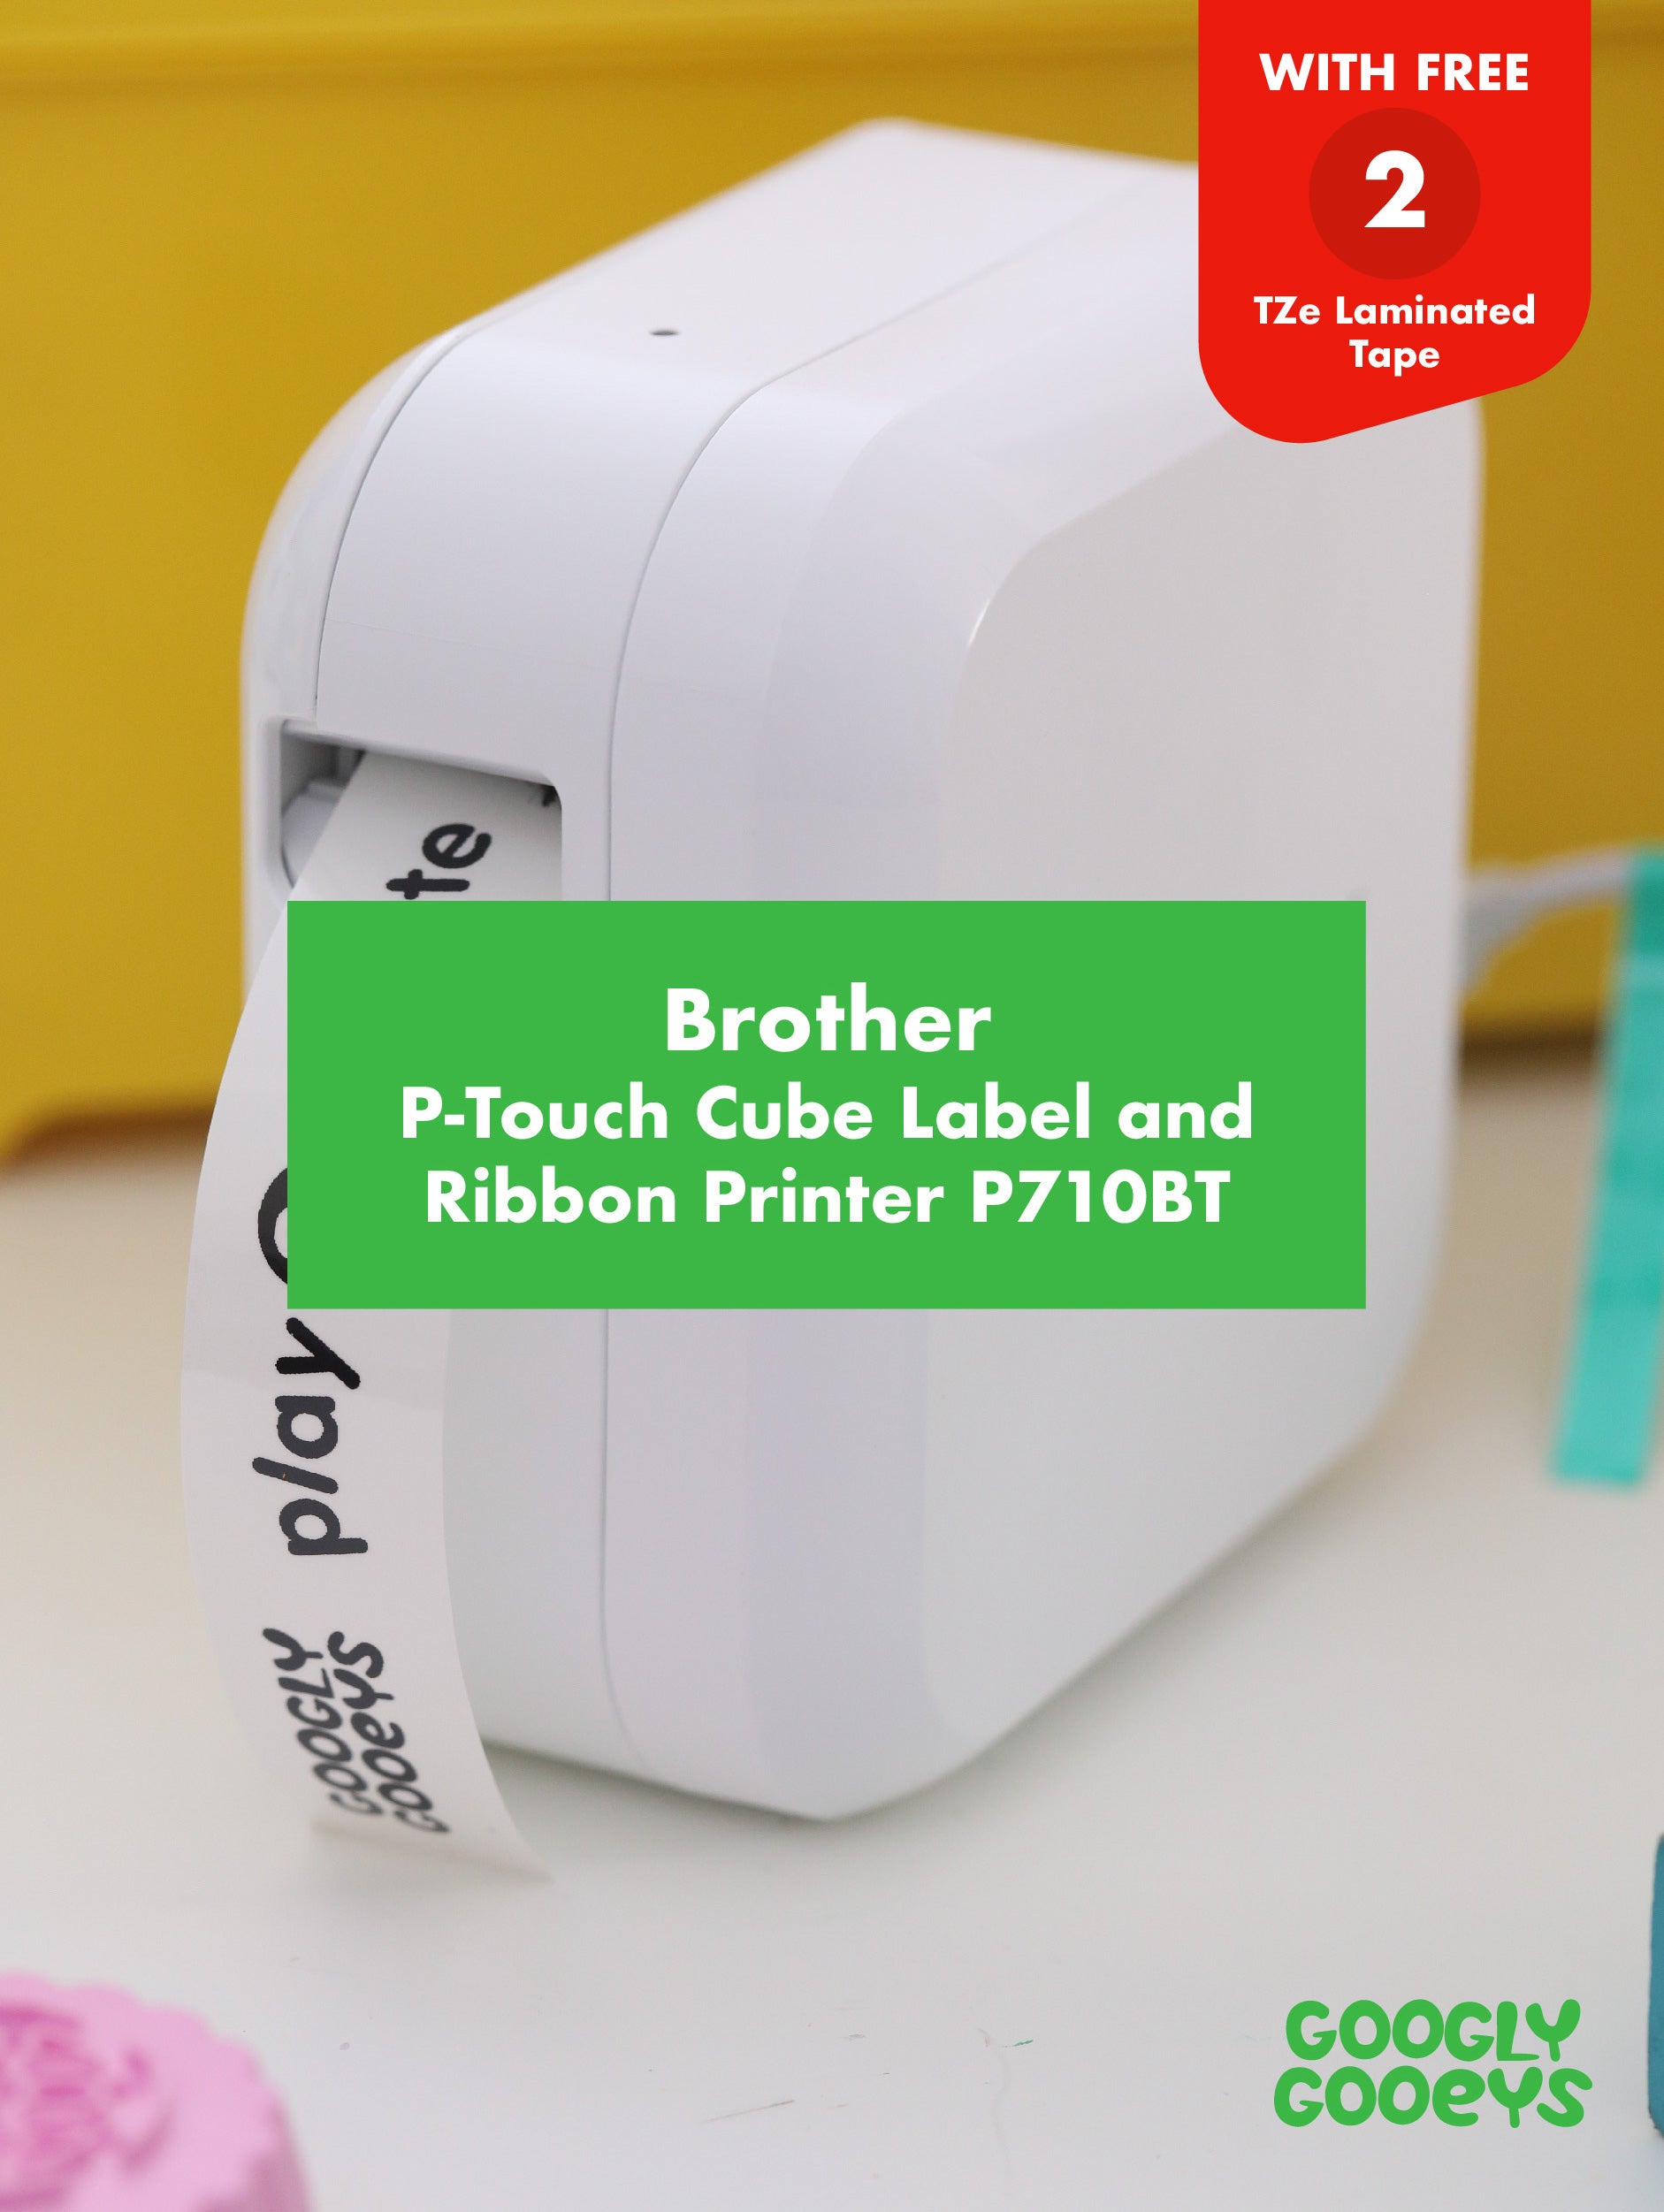 Brother P-Touch Cube Label and Ribbons Printer P710BT